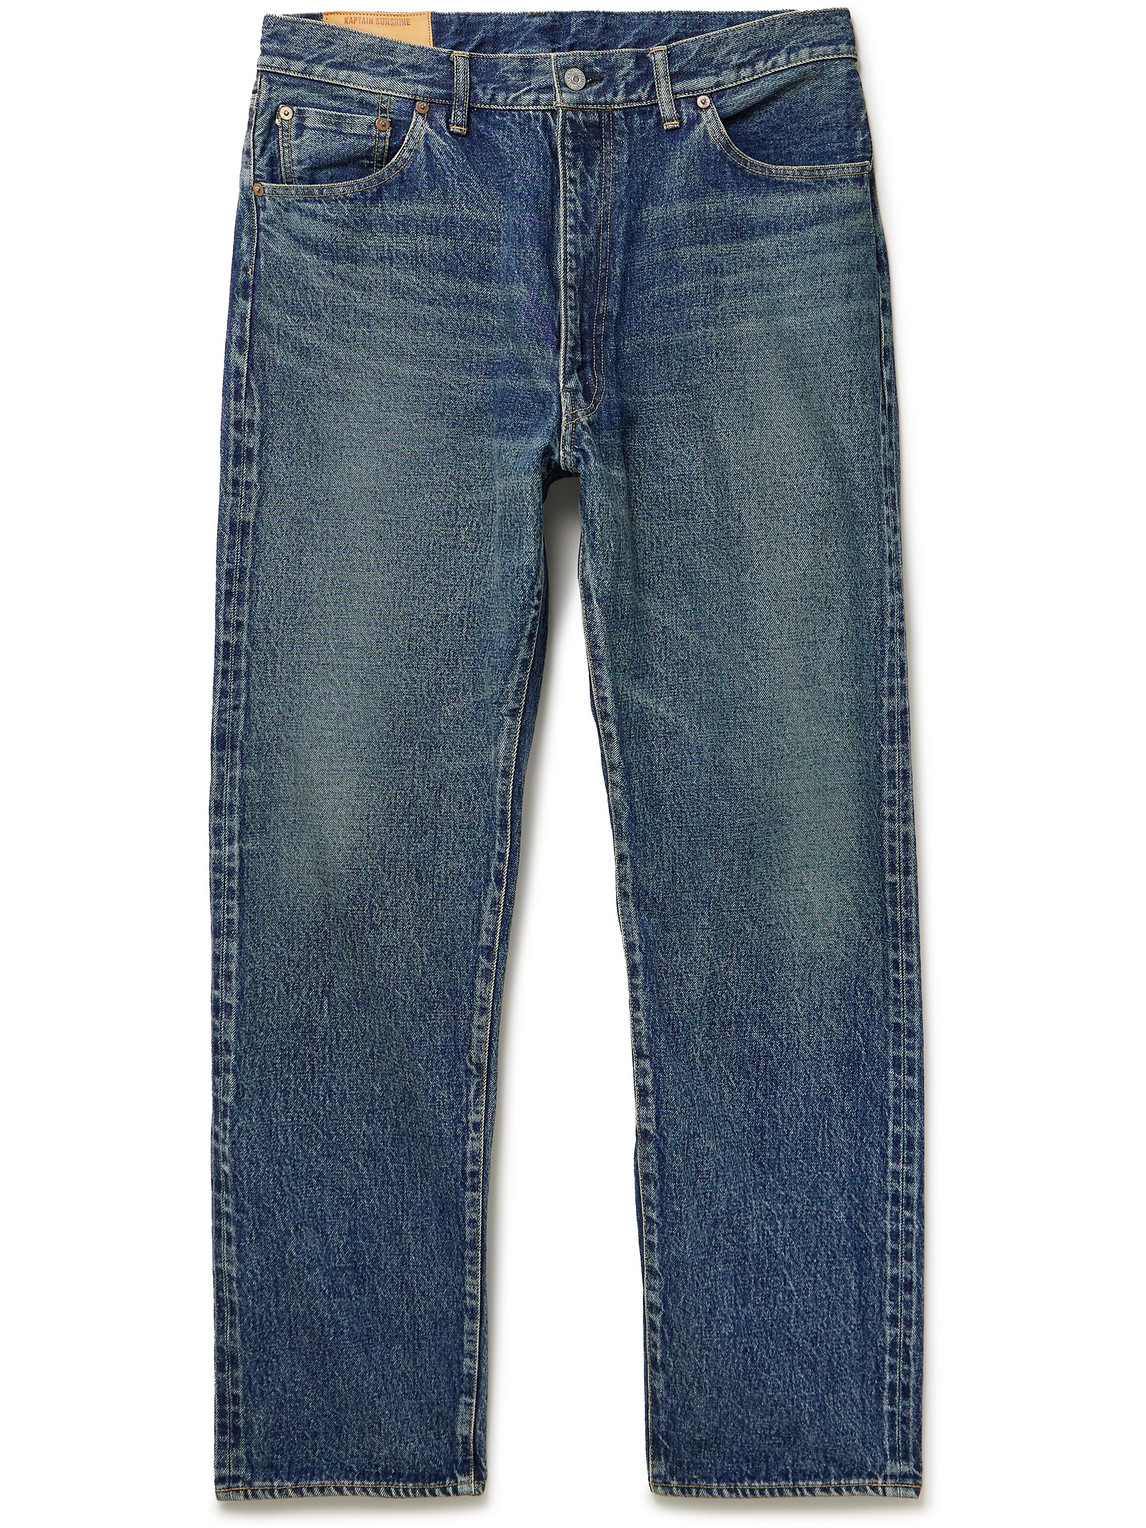 Throwing Fits Straight-Leg Selvedge Jeans